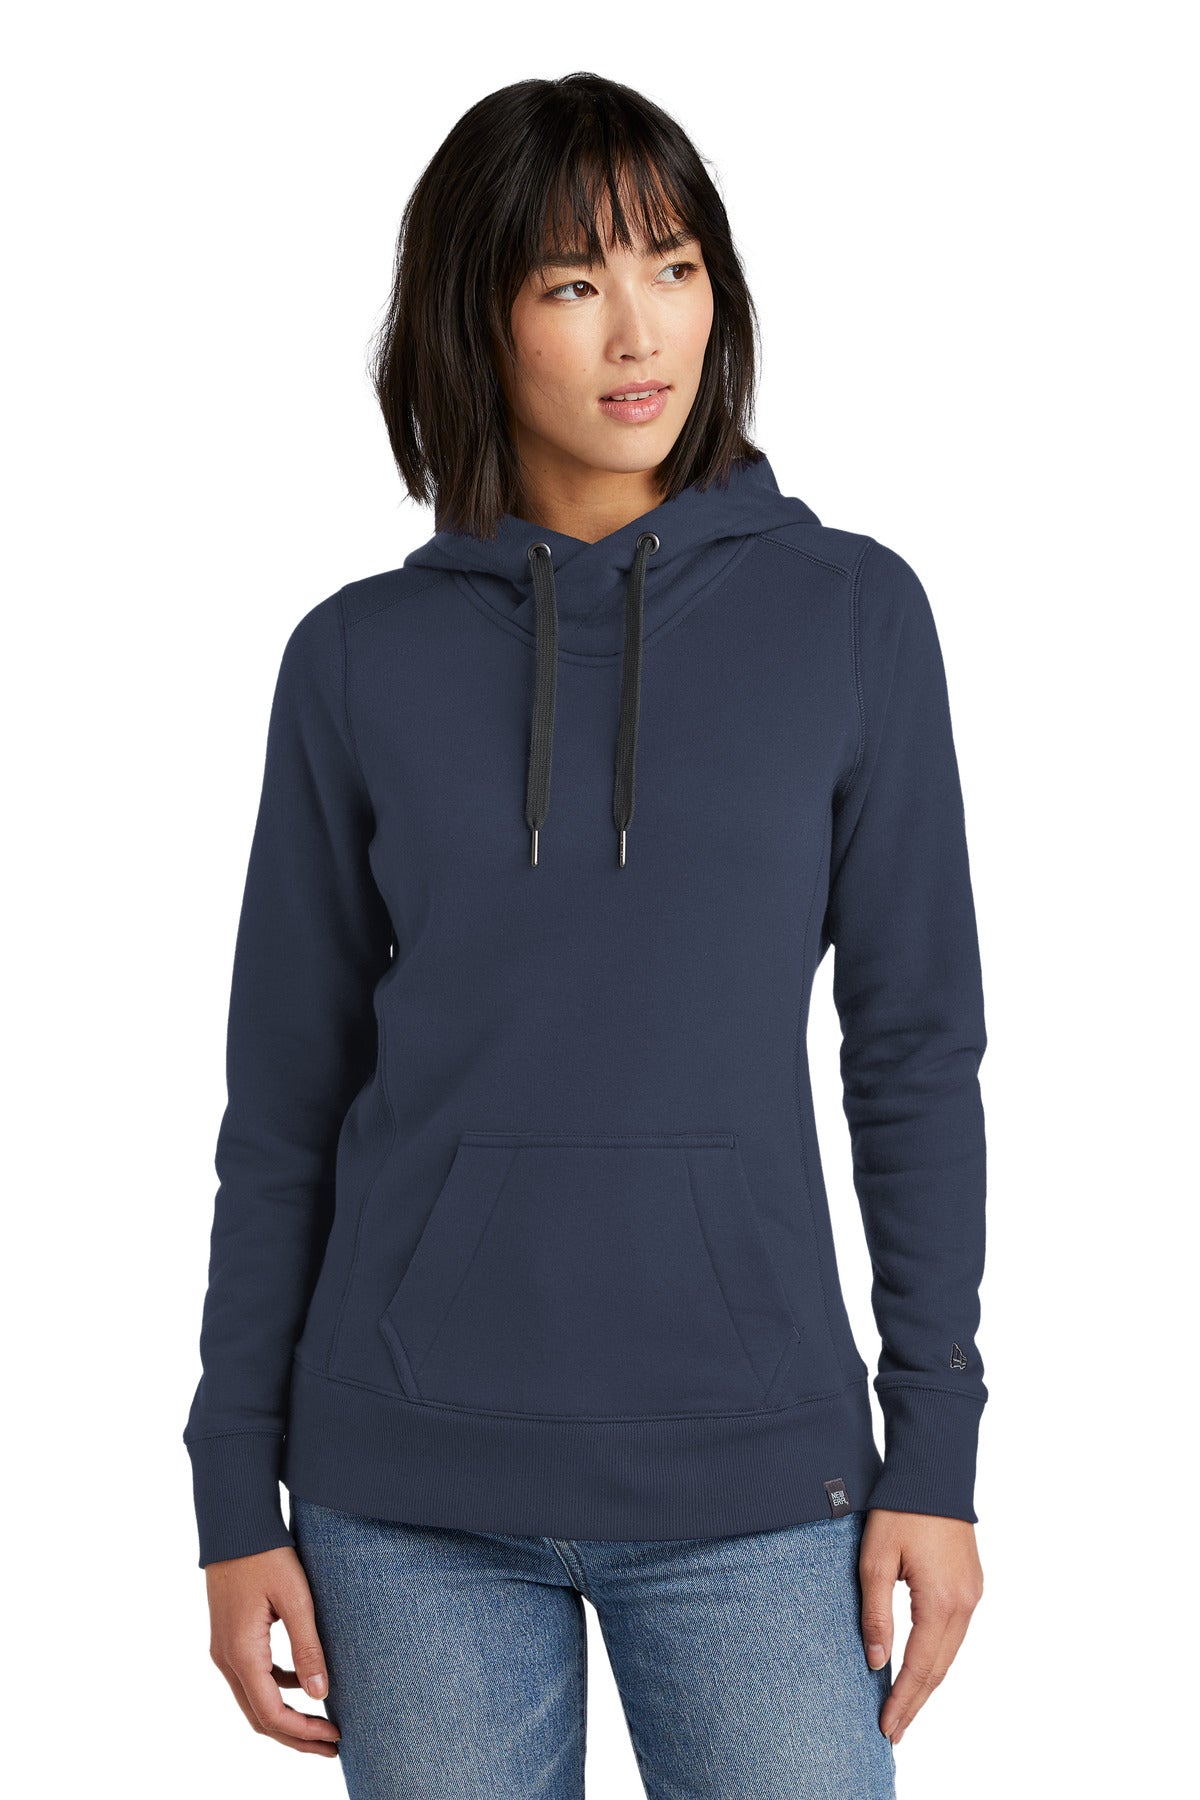 Custom Embroidered - New Era ® Ladies French Terry Pullover Hoodie. LNEA500